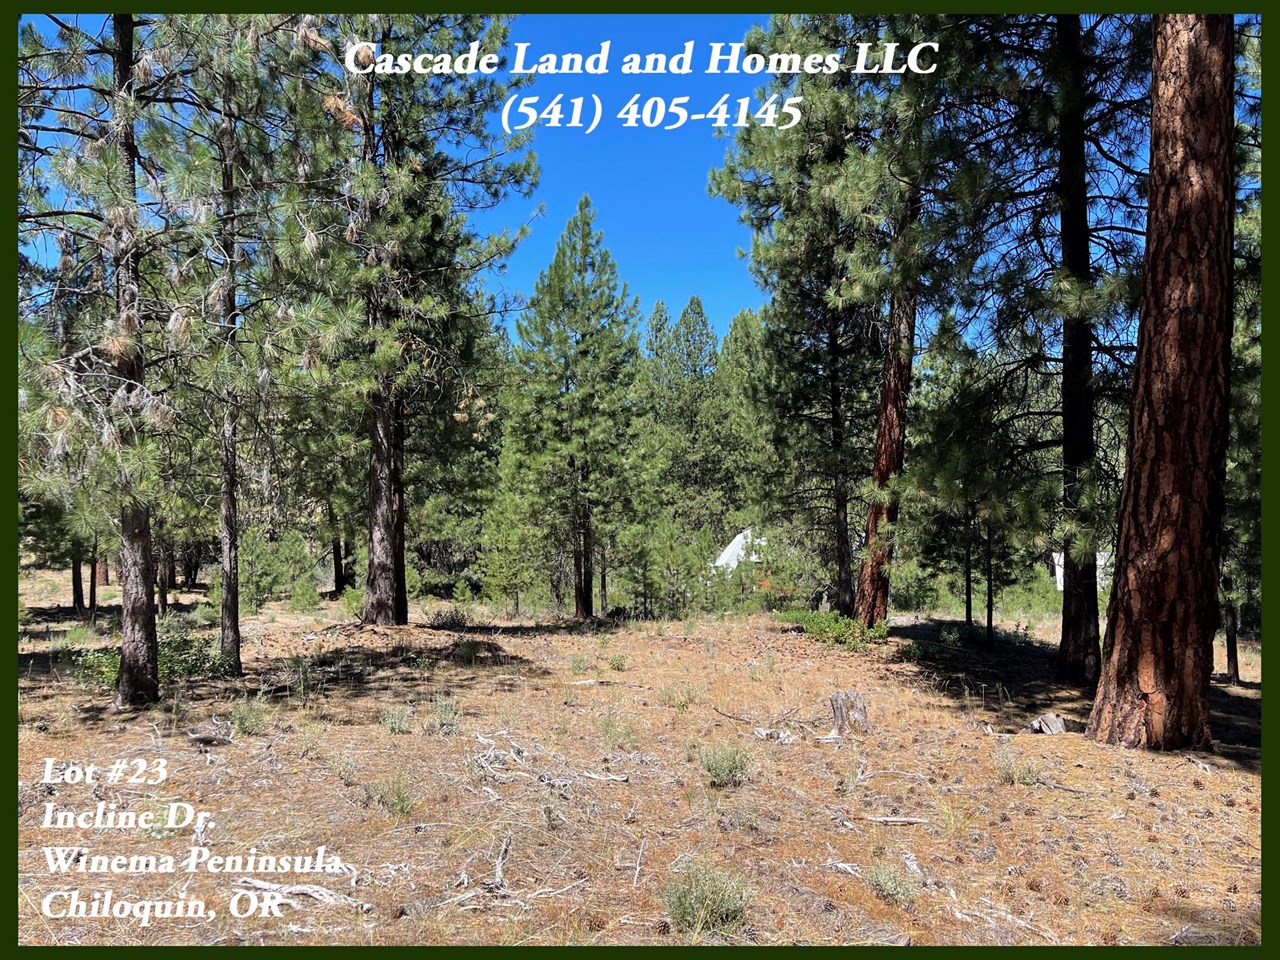 this is an area of custom homes and mostly long term residents, but it would also make a great place for a vacation home. the property is centrally located for outdoor recreation, no matter what season it is!